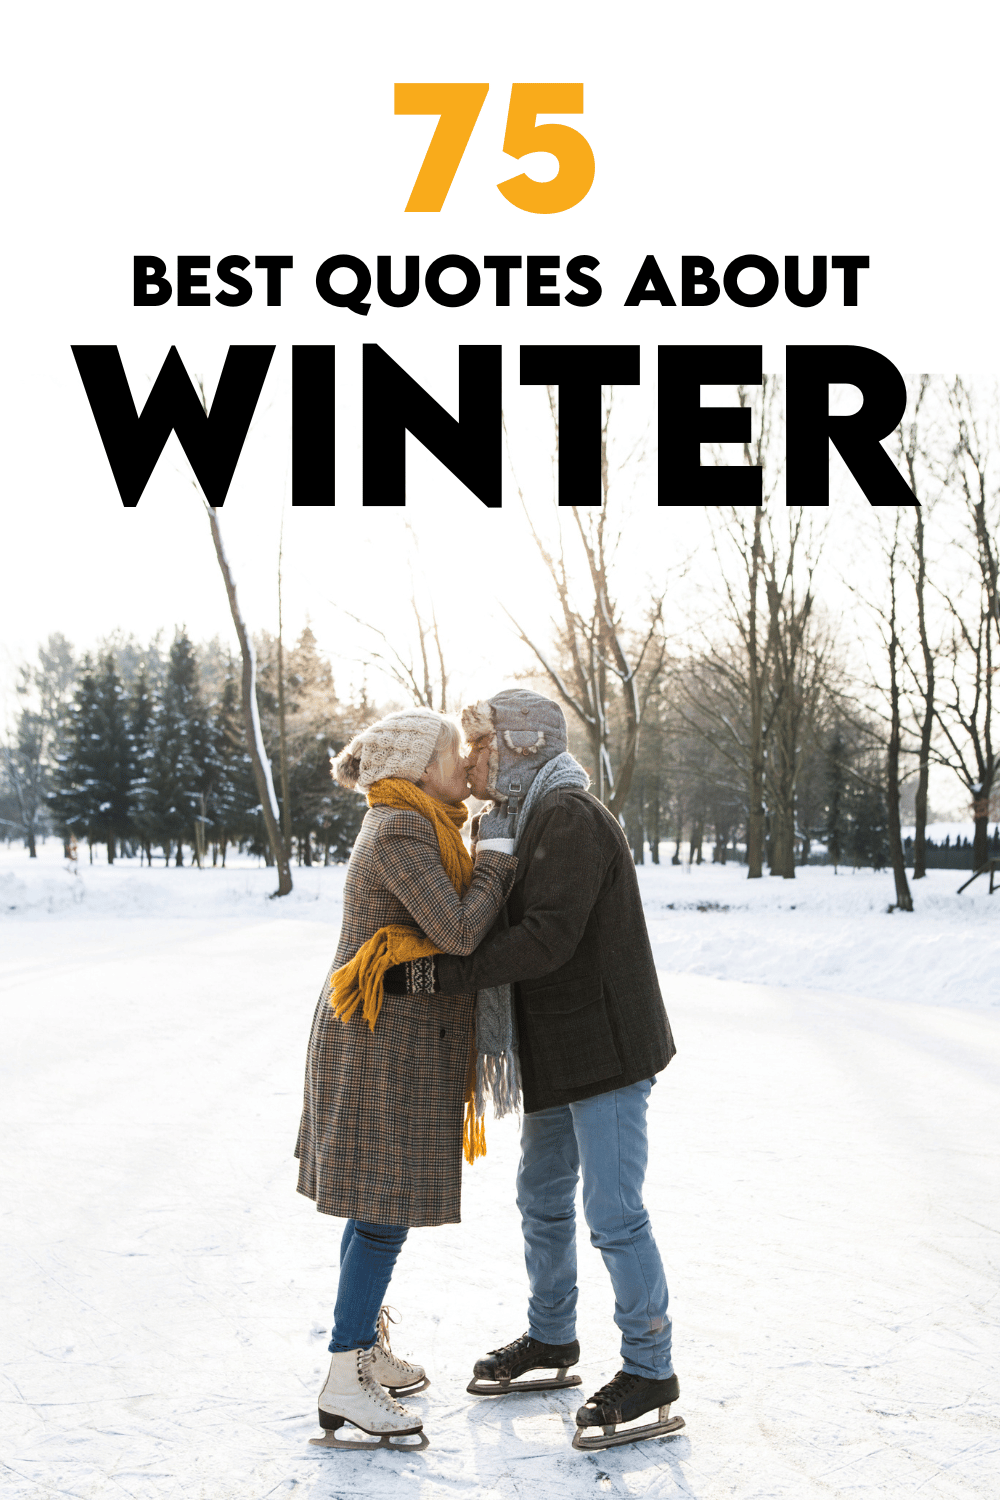 Quotes about winter always bring me a rush of warm feelings. | The Dating Divas